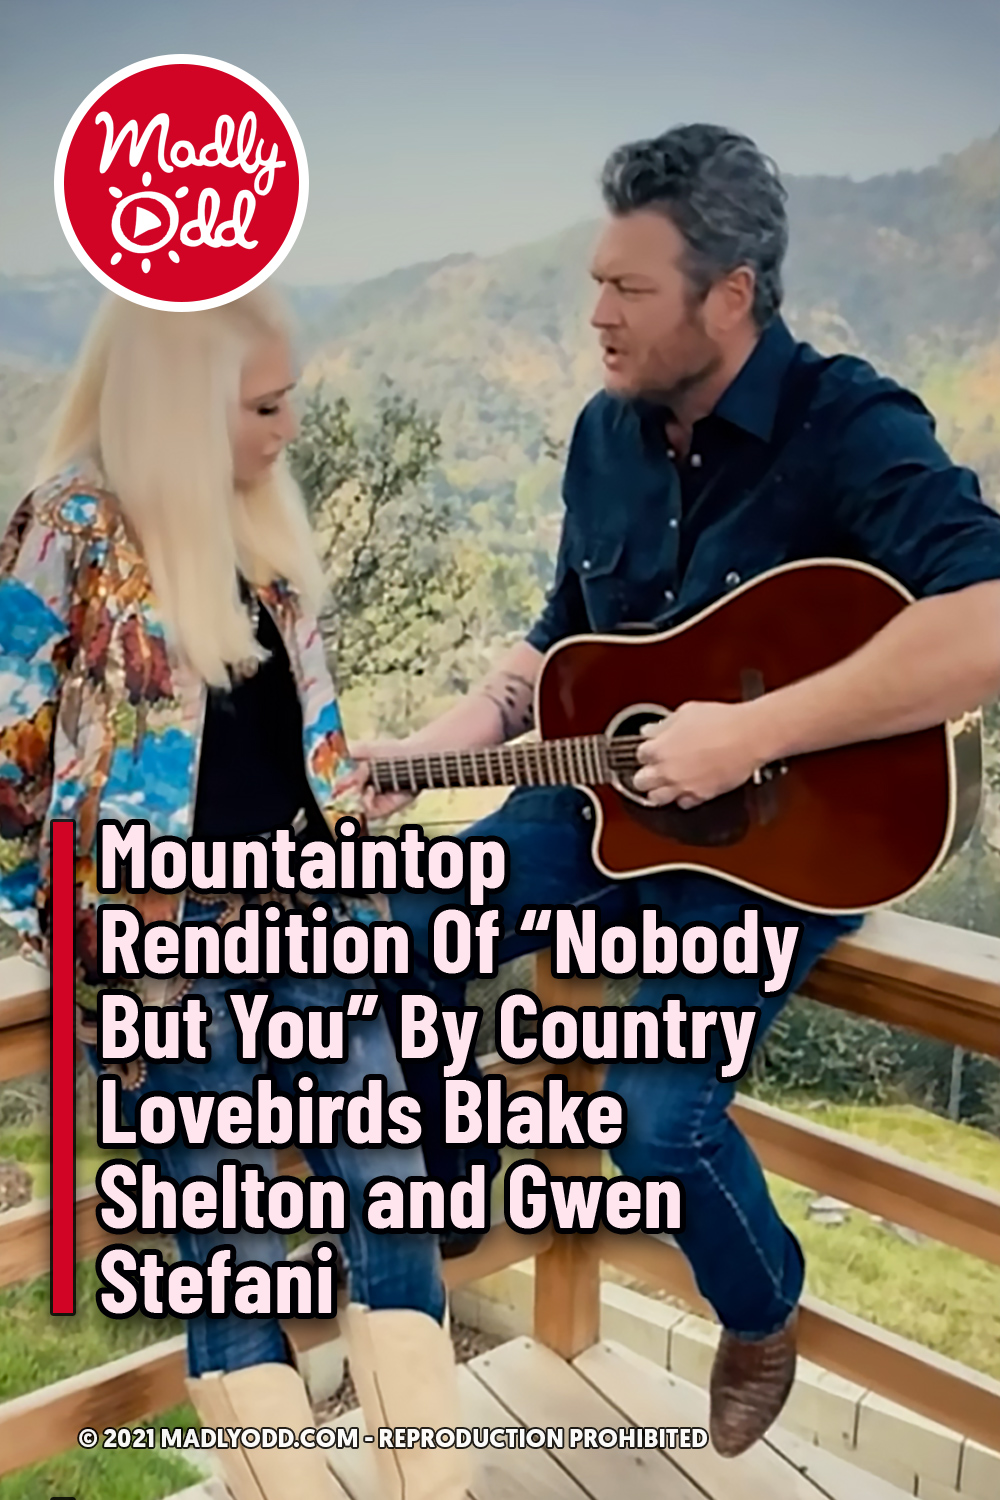 Mountaintop Rendition Of “Nobody But You” By Country Lovebirds Blake Shelton and Gwen Stefani